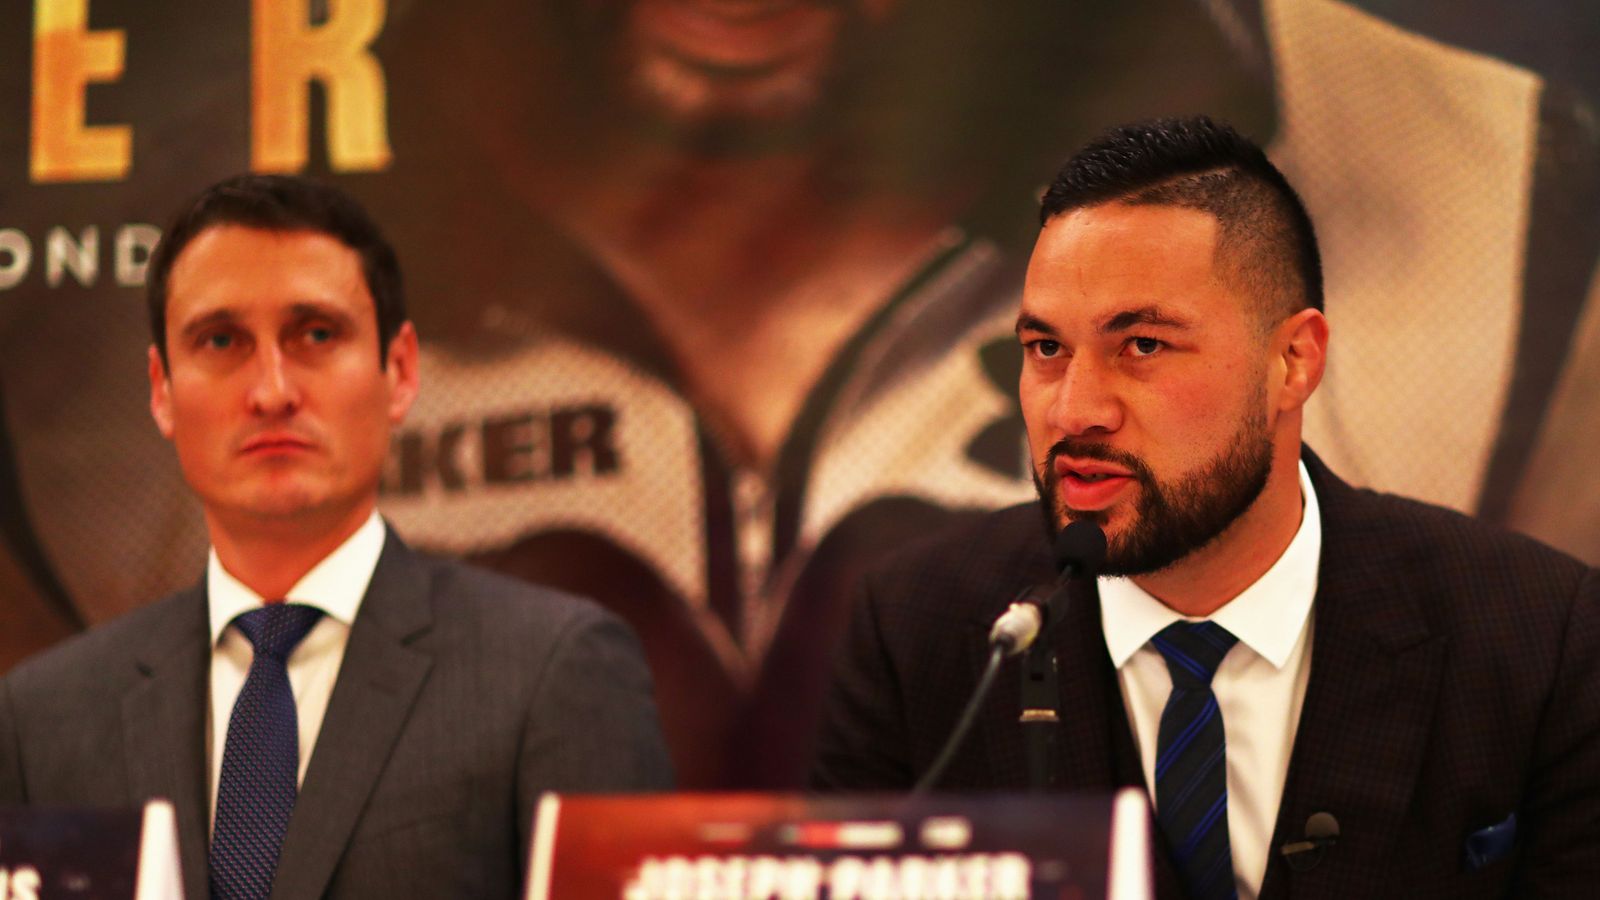 Joseph Parker and Derek Chisora 'terms agreed' despite months of difficult negotiations